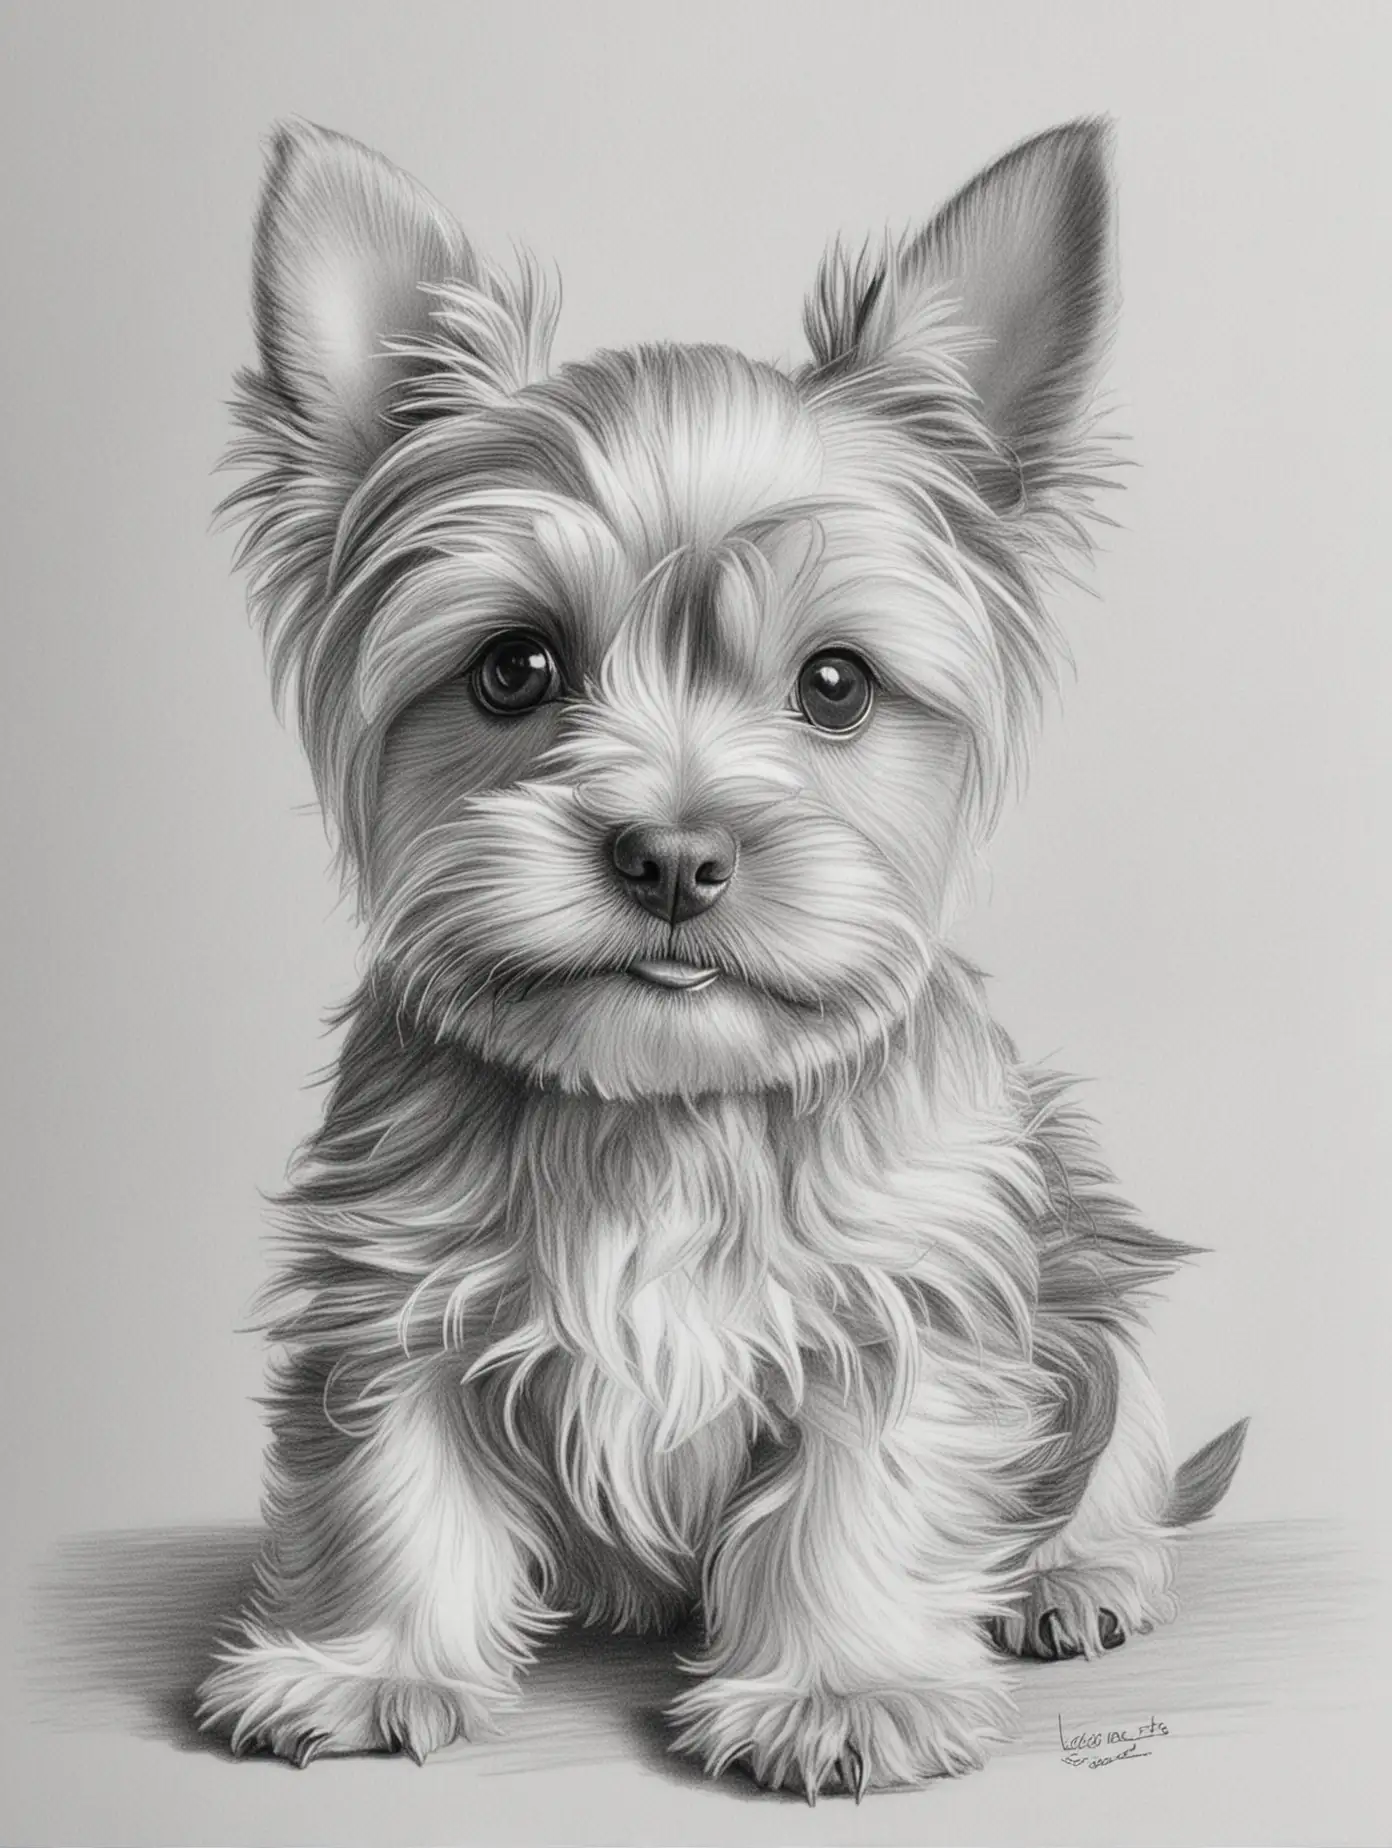 Adorable Yorkshire Terrier Puppy Sketch for Childrens Coloring Book